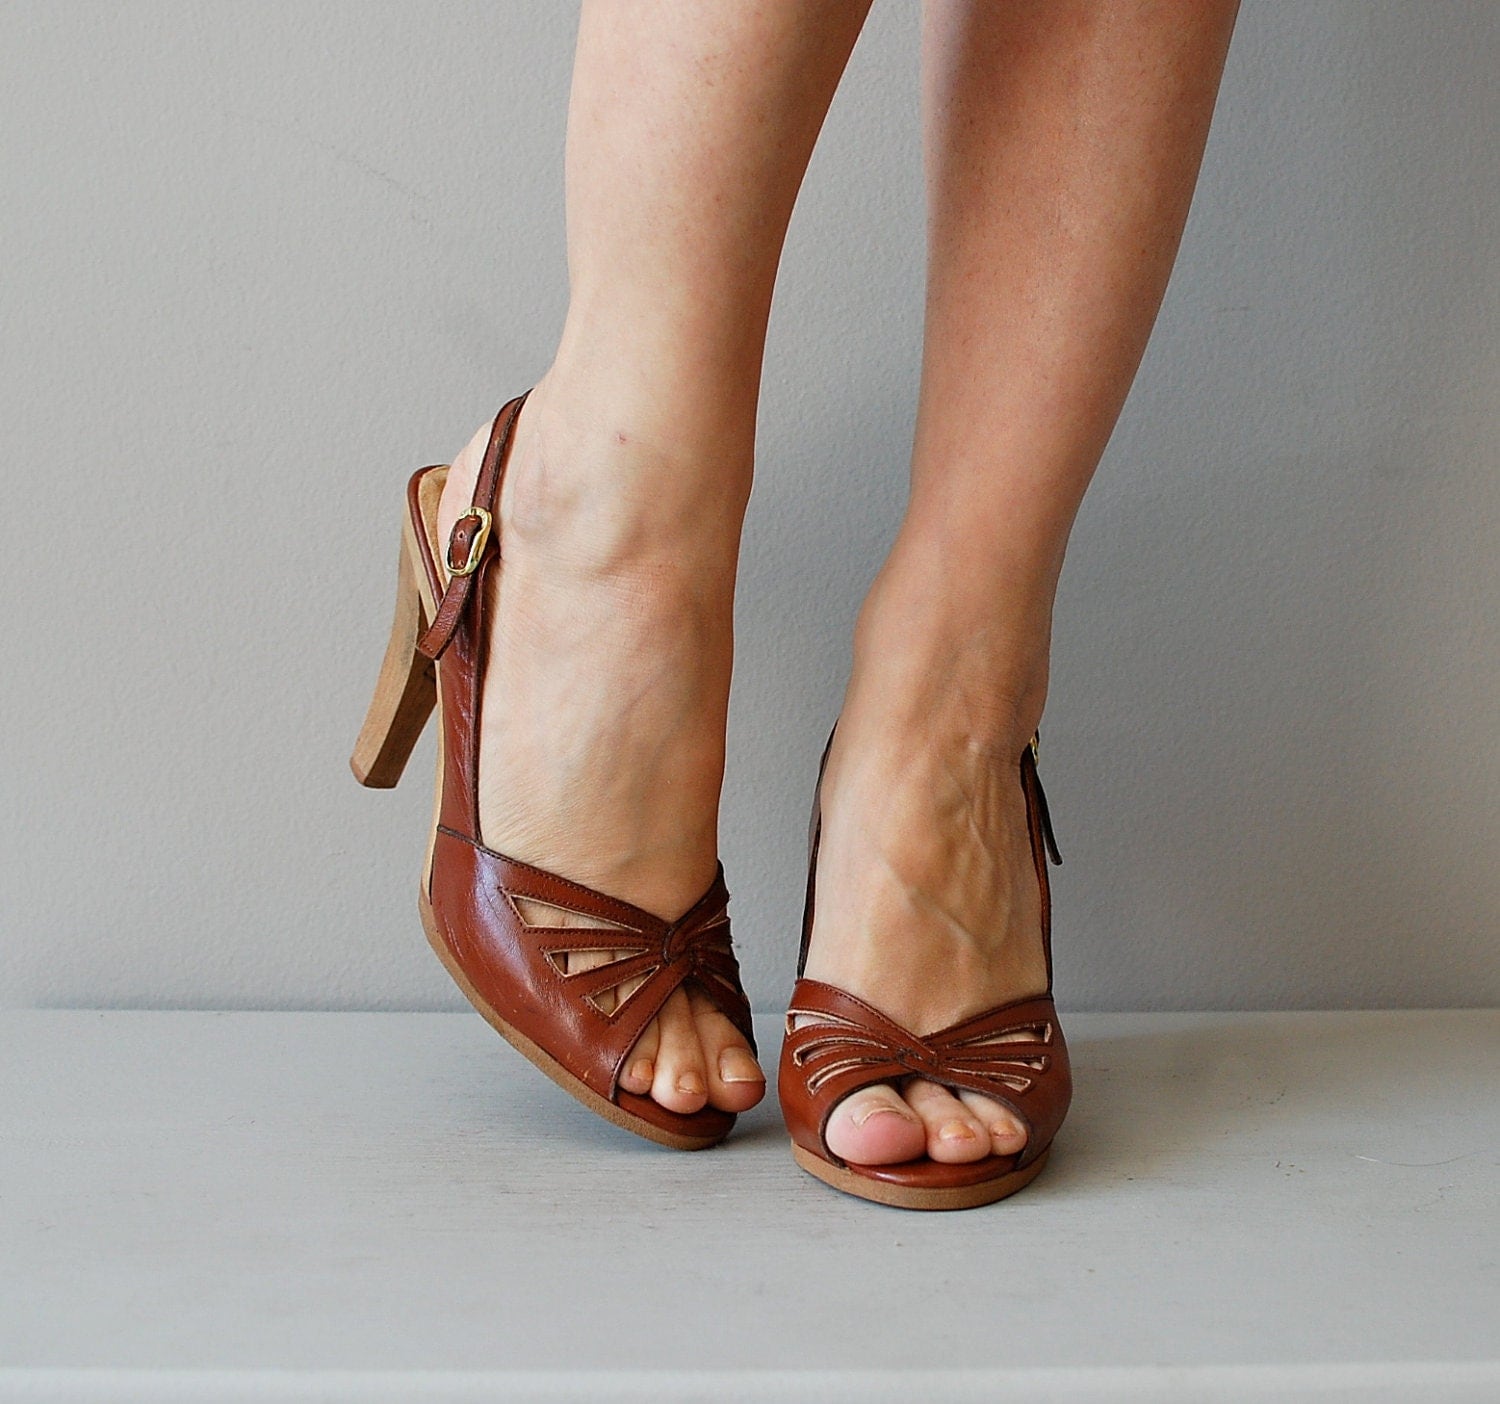 vintage 1970s shoes / wood heel / 70s leather and wood shoes